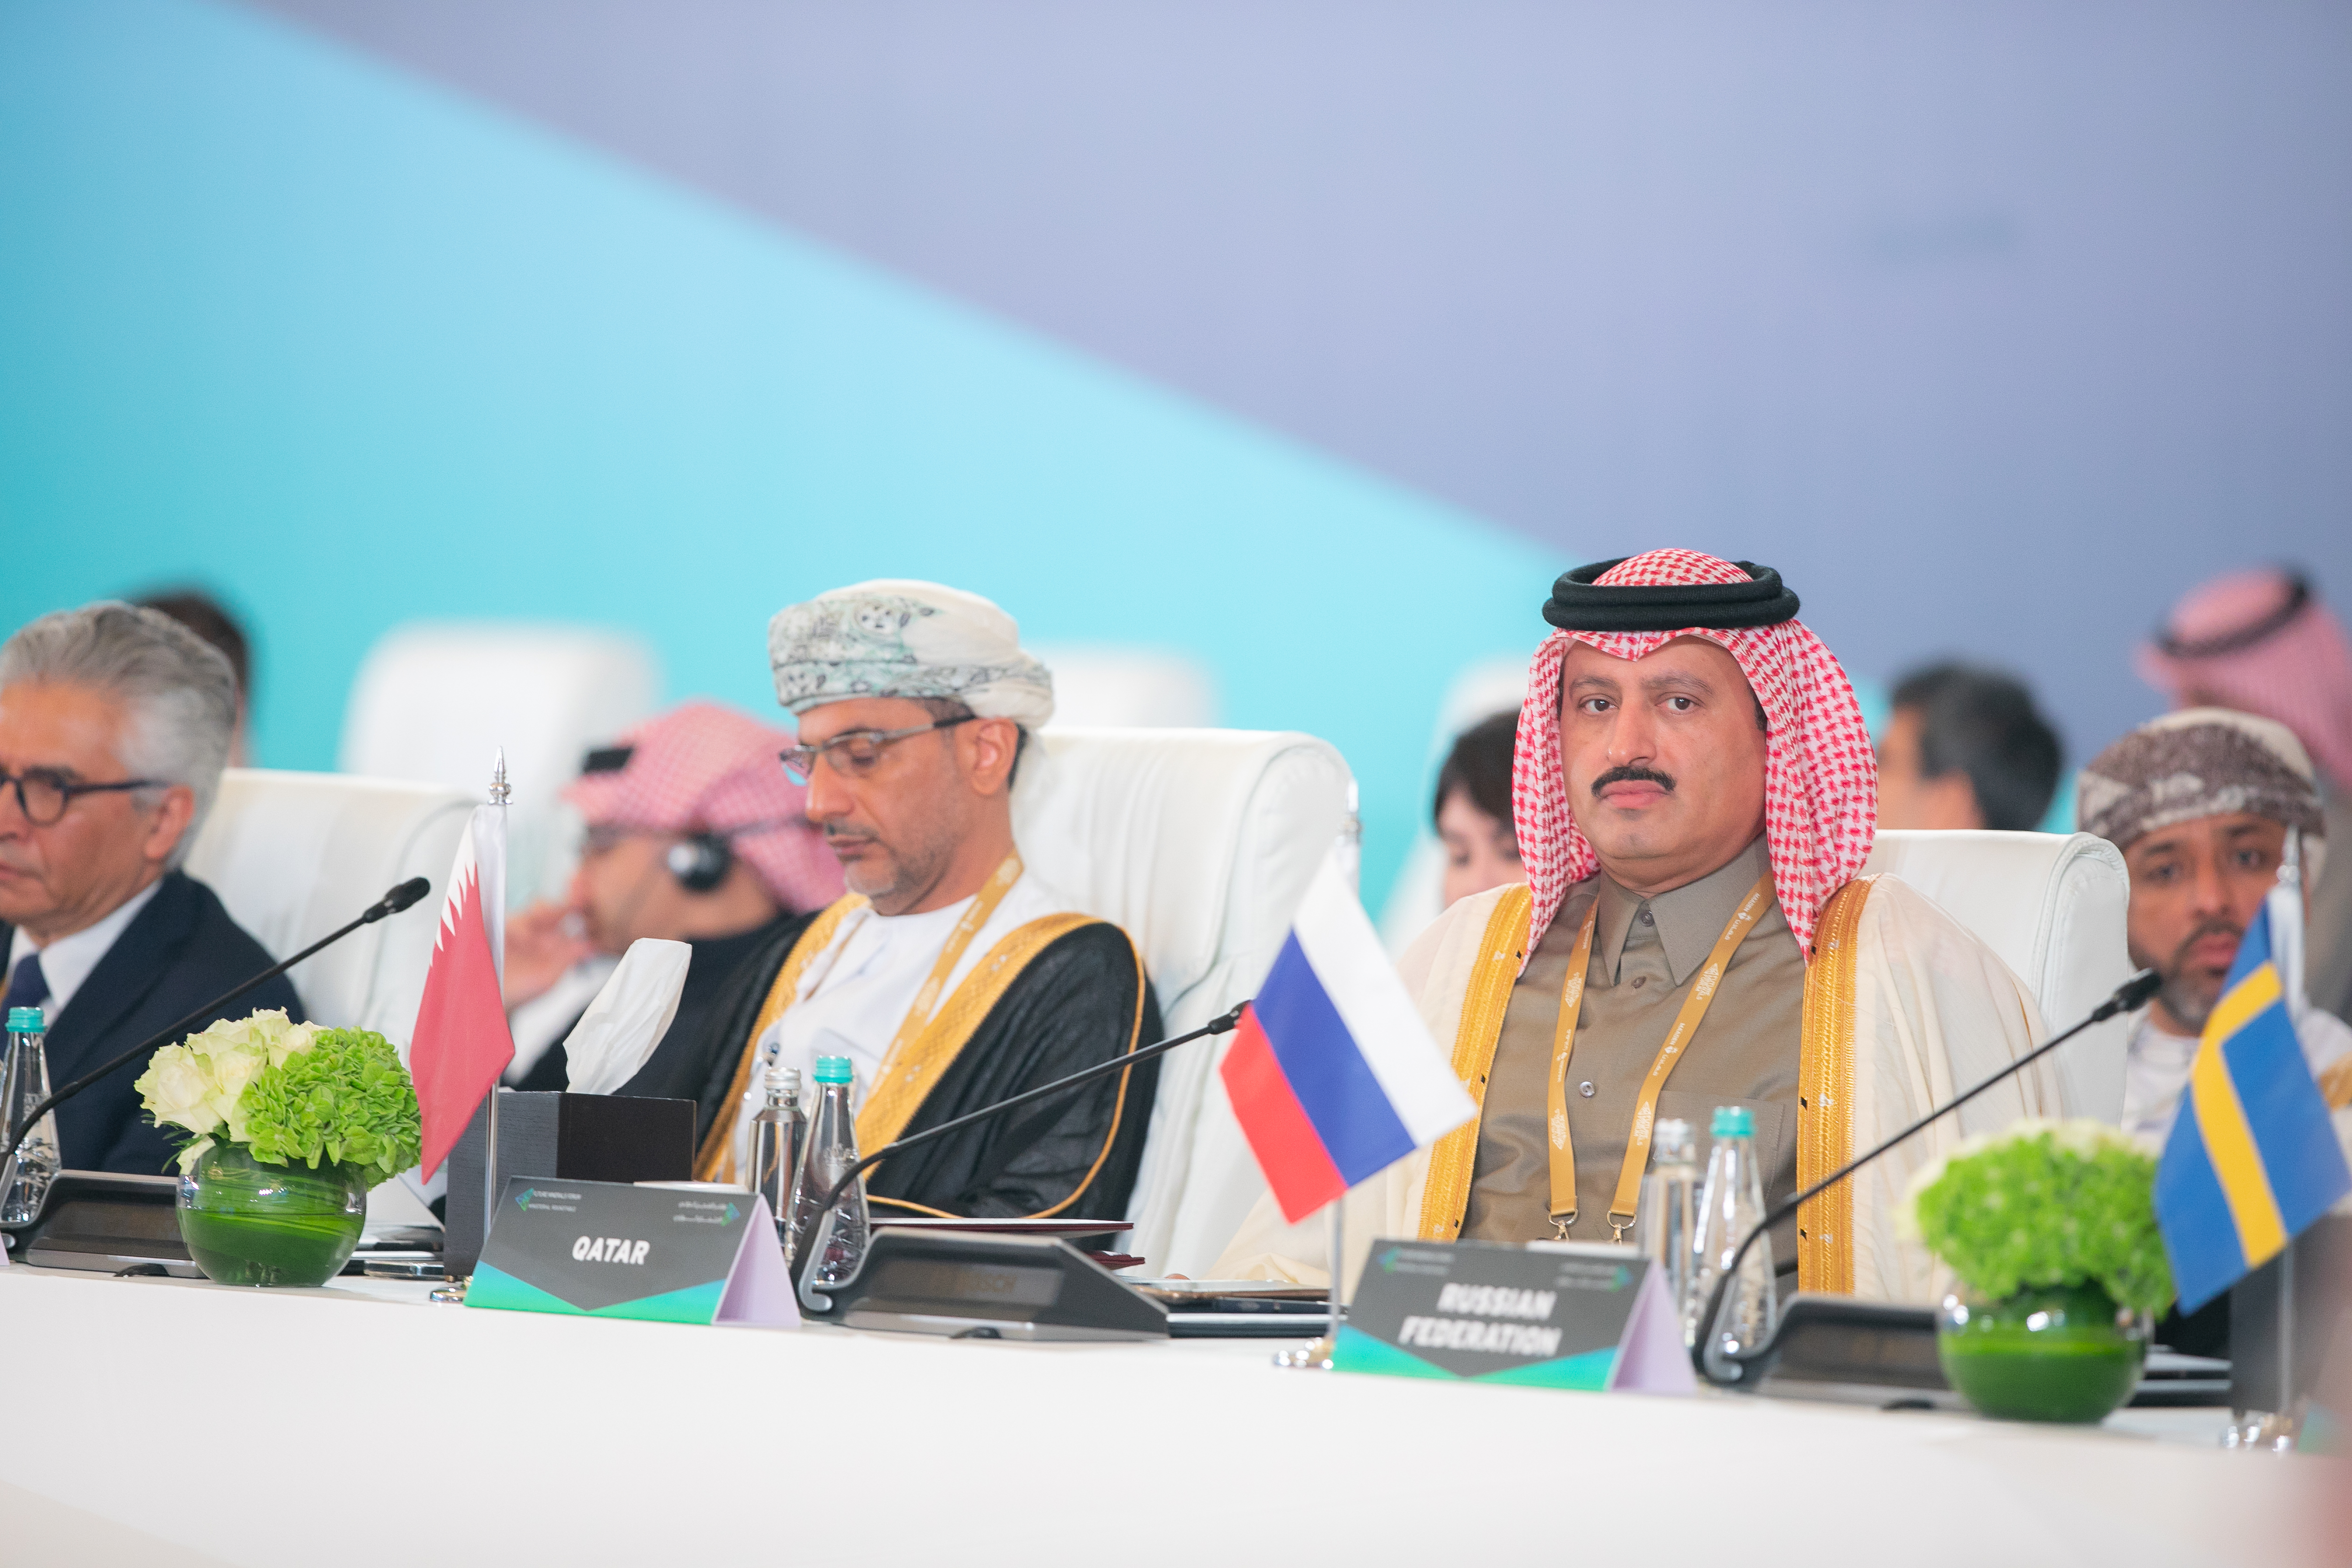 H.E. Undersecretary of Ministry of Commerce and Industry Participates in Ministerial Roundtable at Second Edition of FMF in the Kingdom of Saudi Arabia